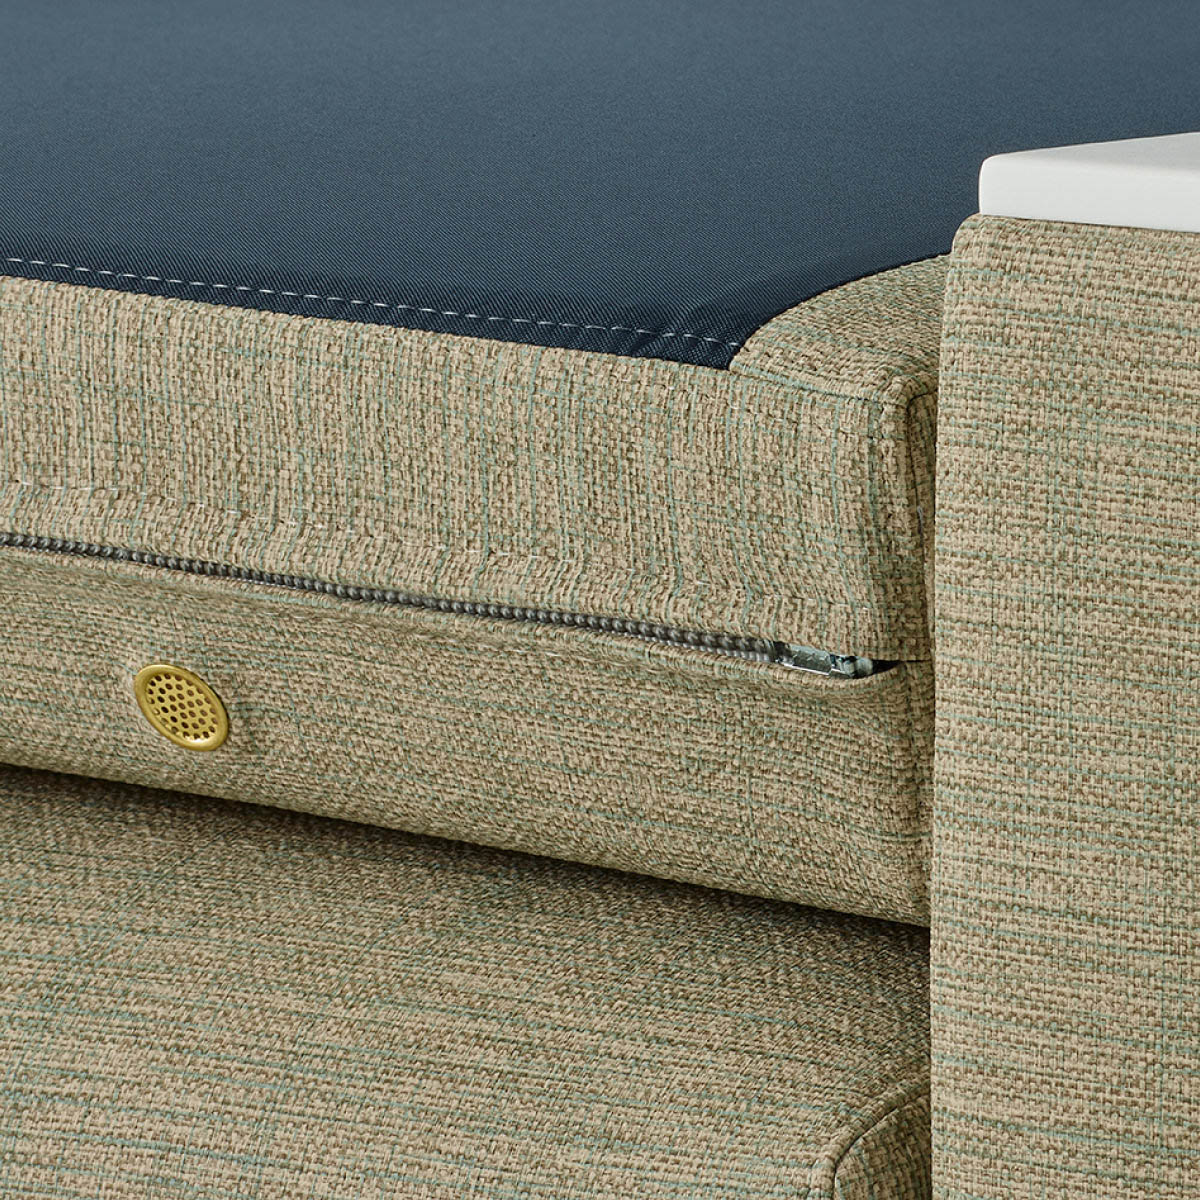 Detail of removable covers on a Nemschoff Merge 2 Flop Sofa.